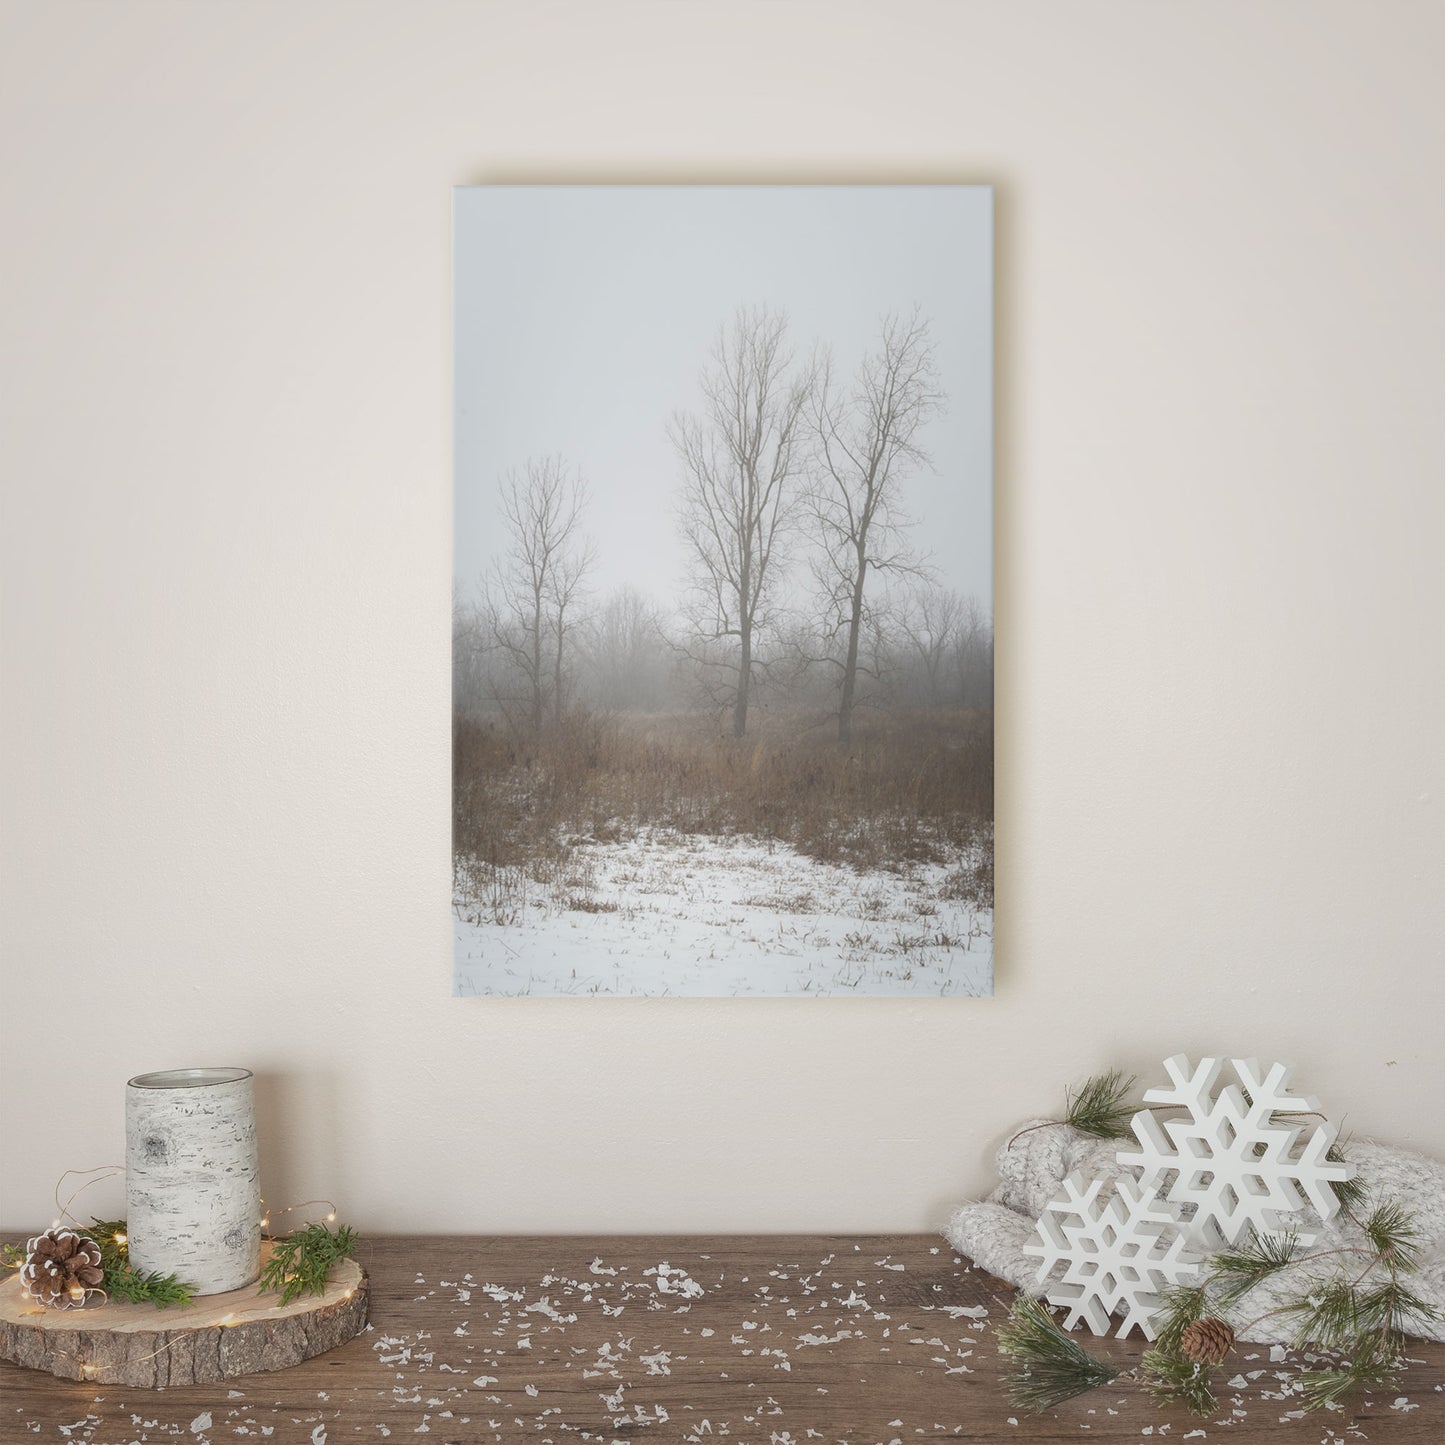 High-quality canvas print featuring snowy, mist-enshrouded trees, ideal for instilling a sense of winter serenity."